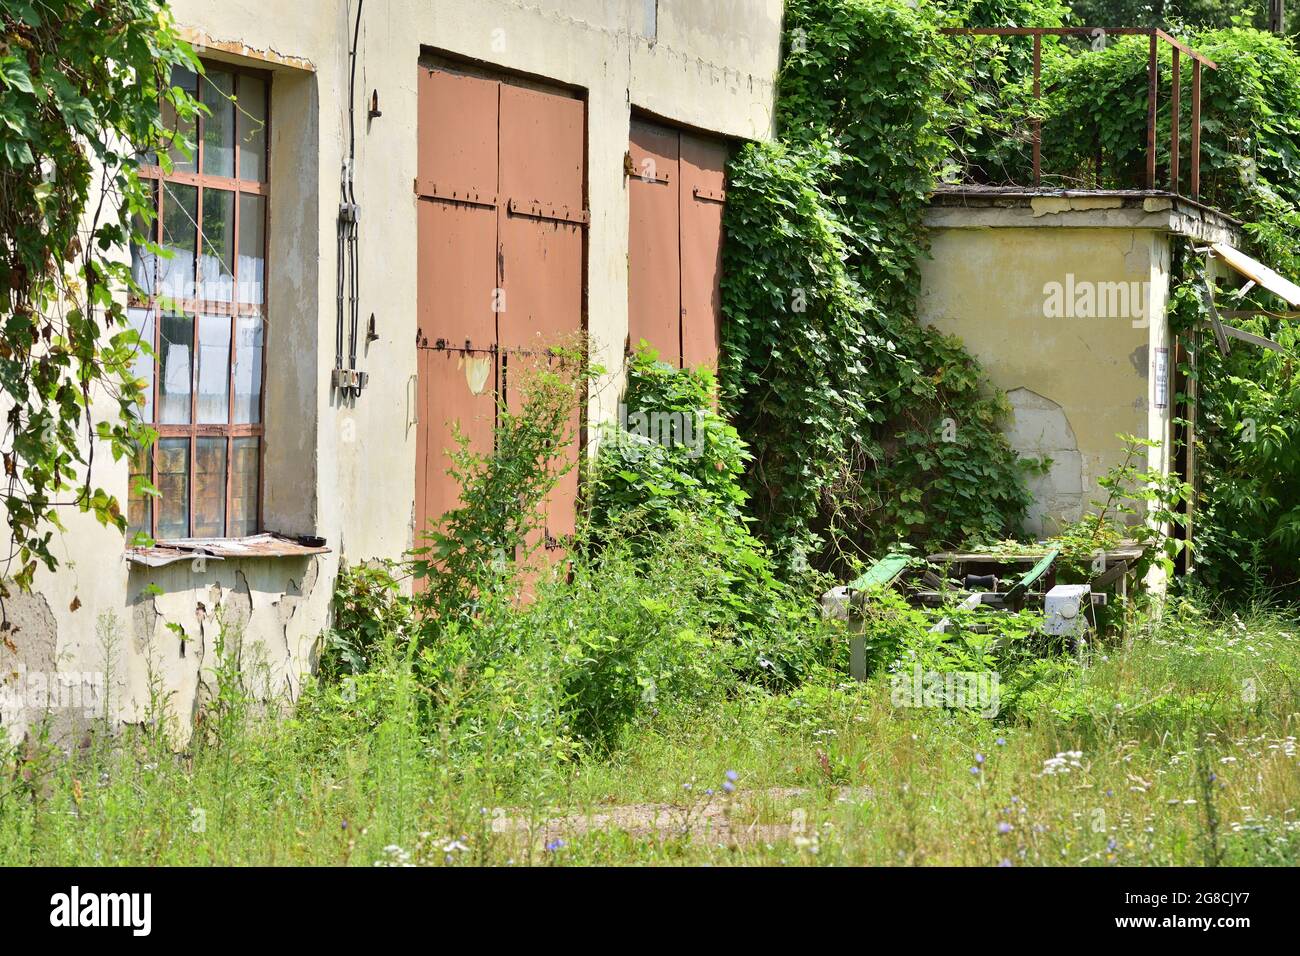 Abandoned and neglected building and garage. Summer. Stock Photo